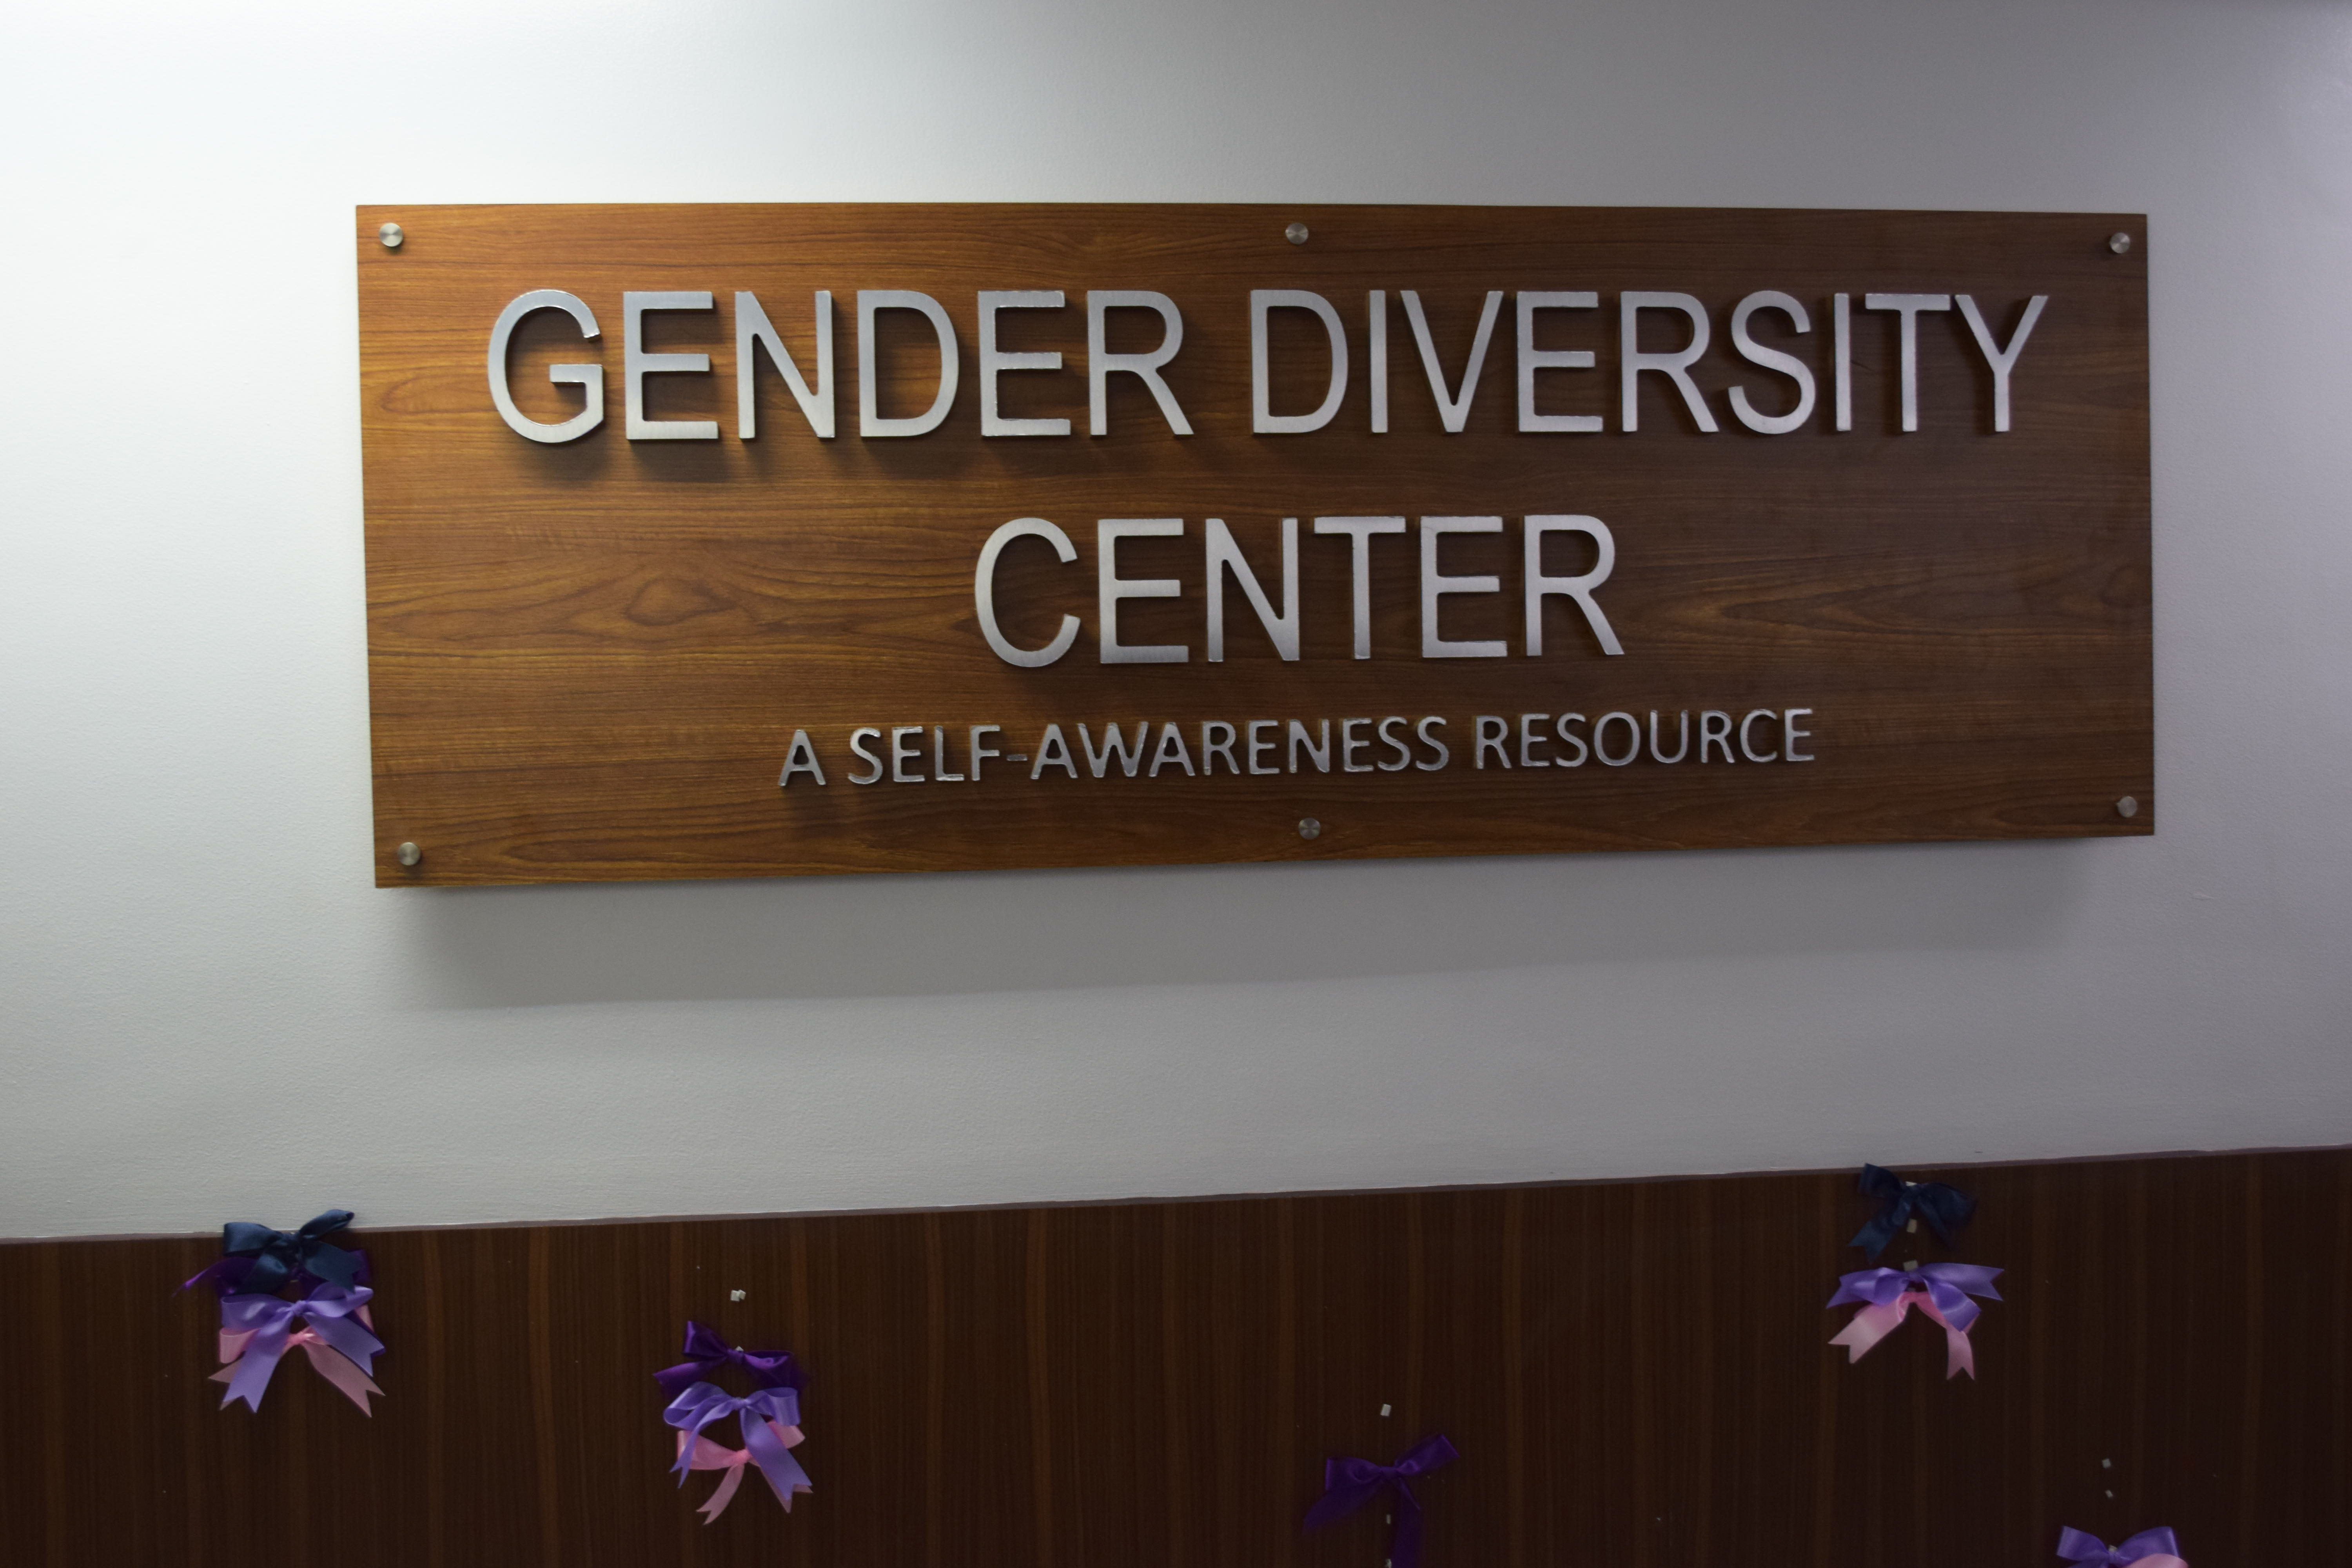 FIRST IN PH. The Gender Diversity Center gives the chance for the LGBT community to assess themselves.  